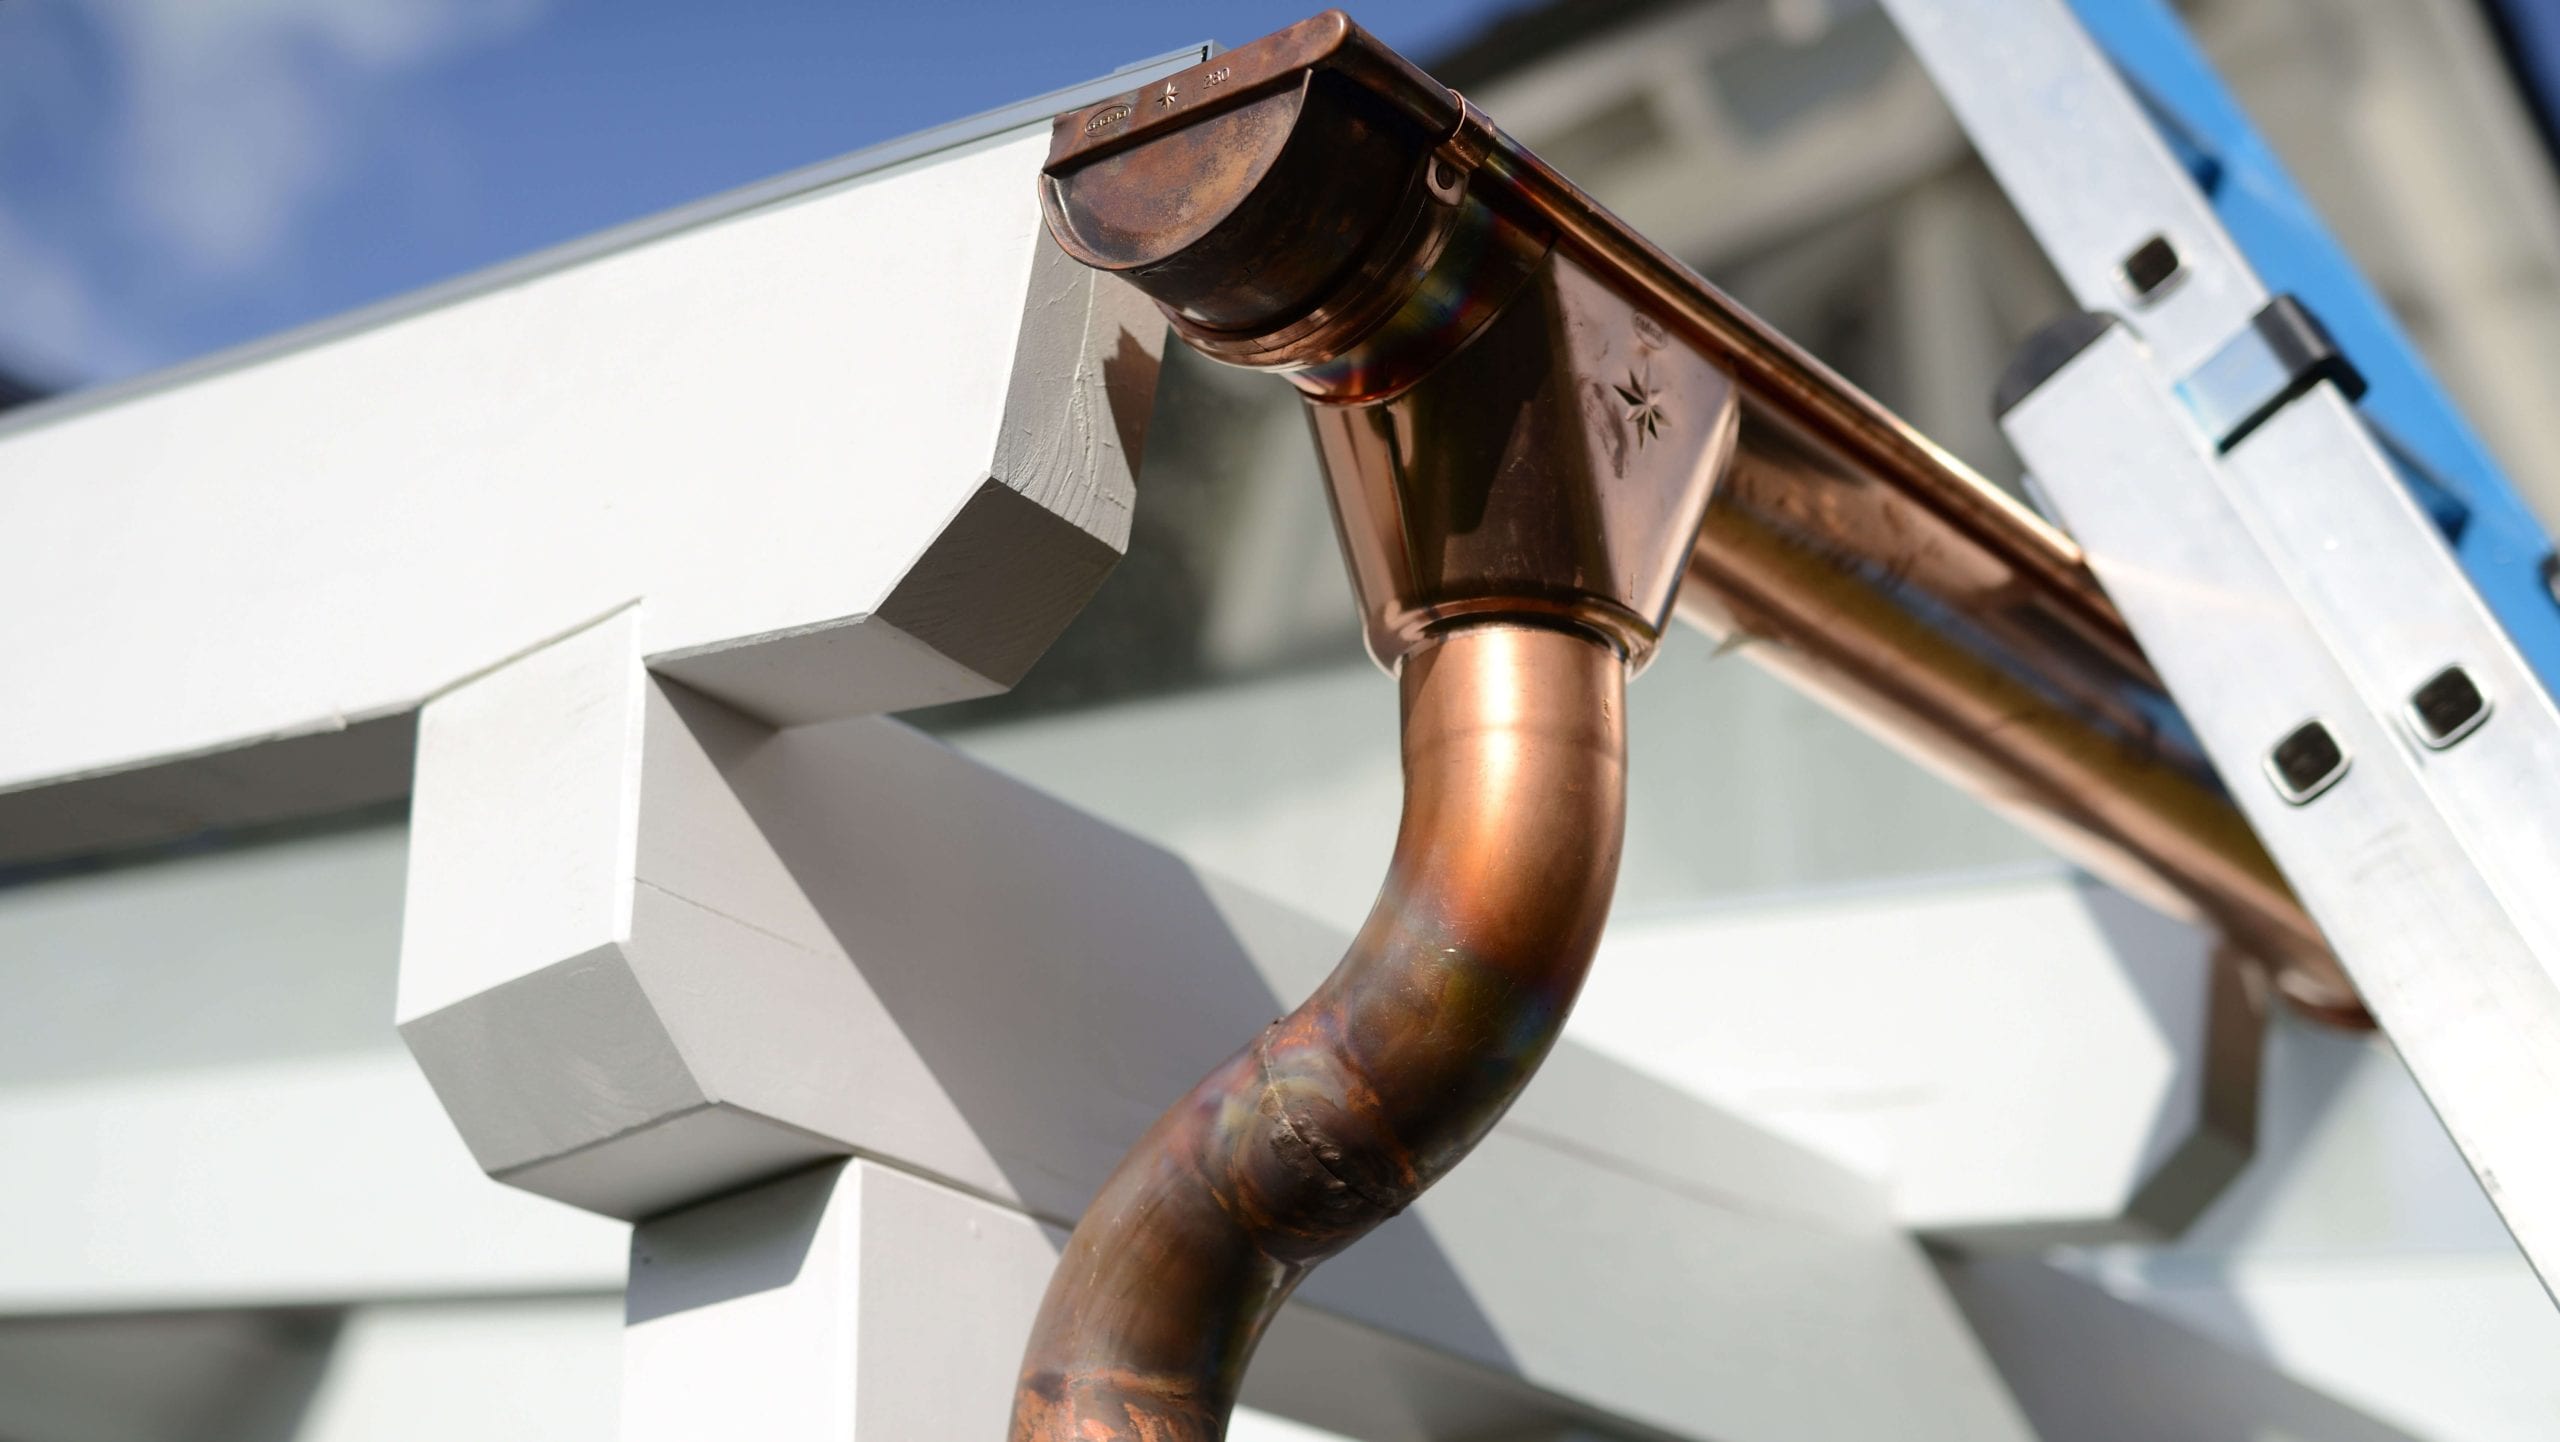 Make your property stand out with copper gutters. Contact for gutter installation in Oklahoma City